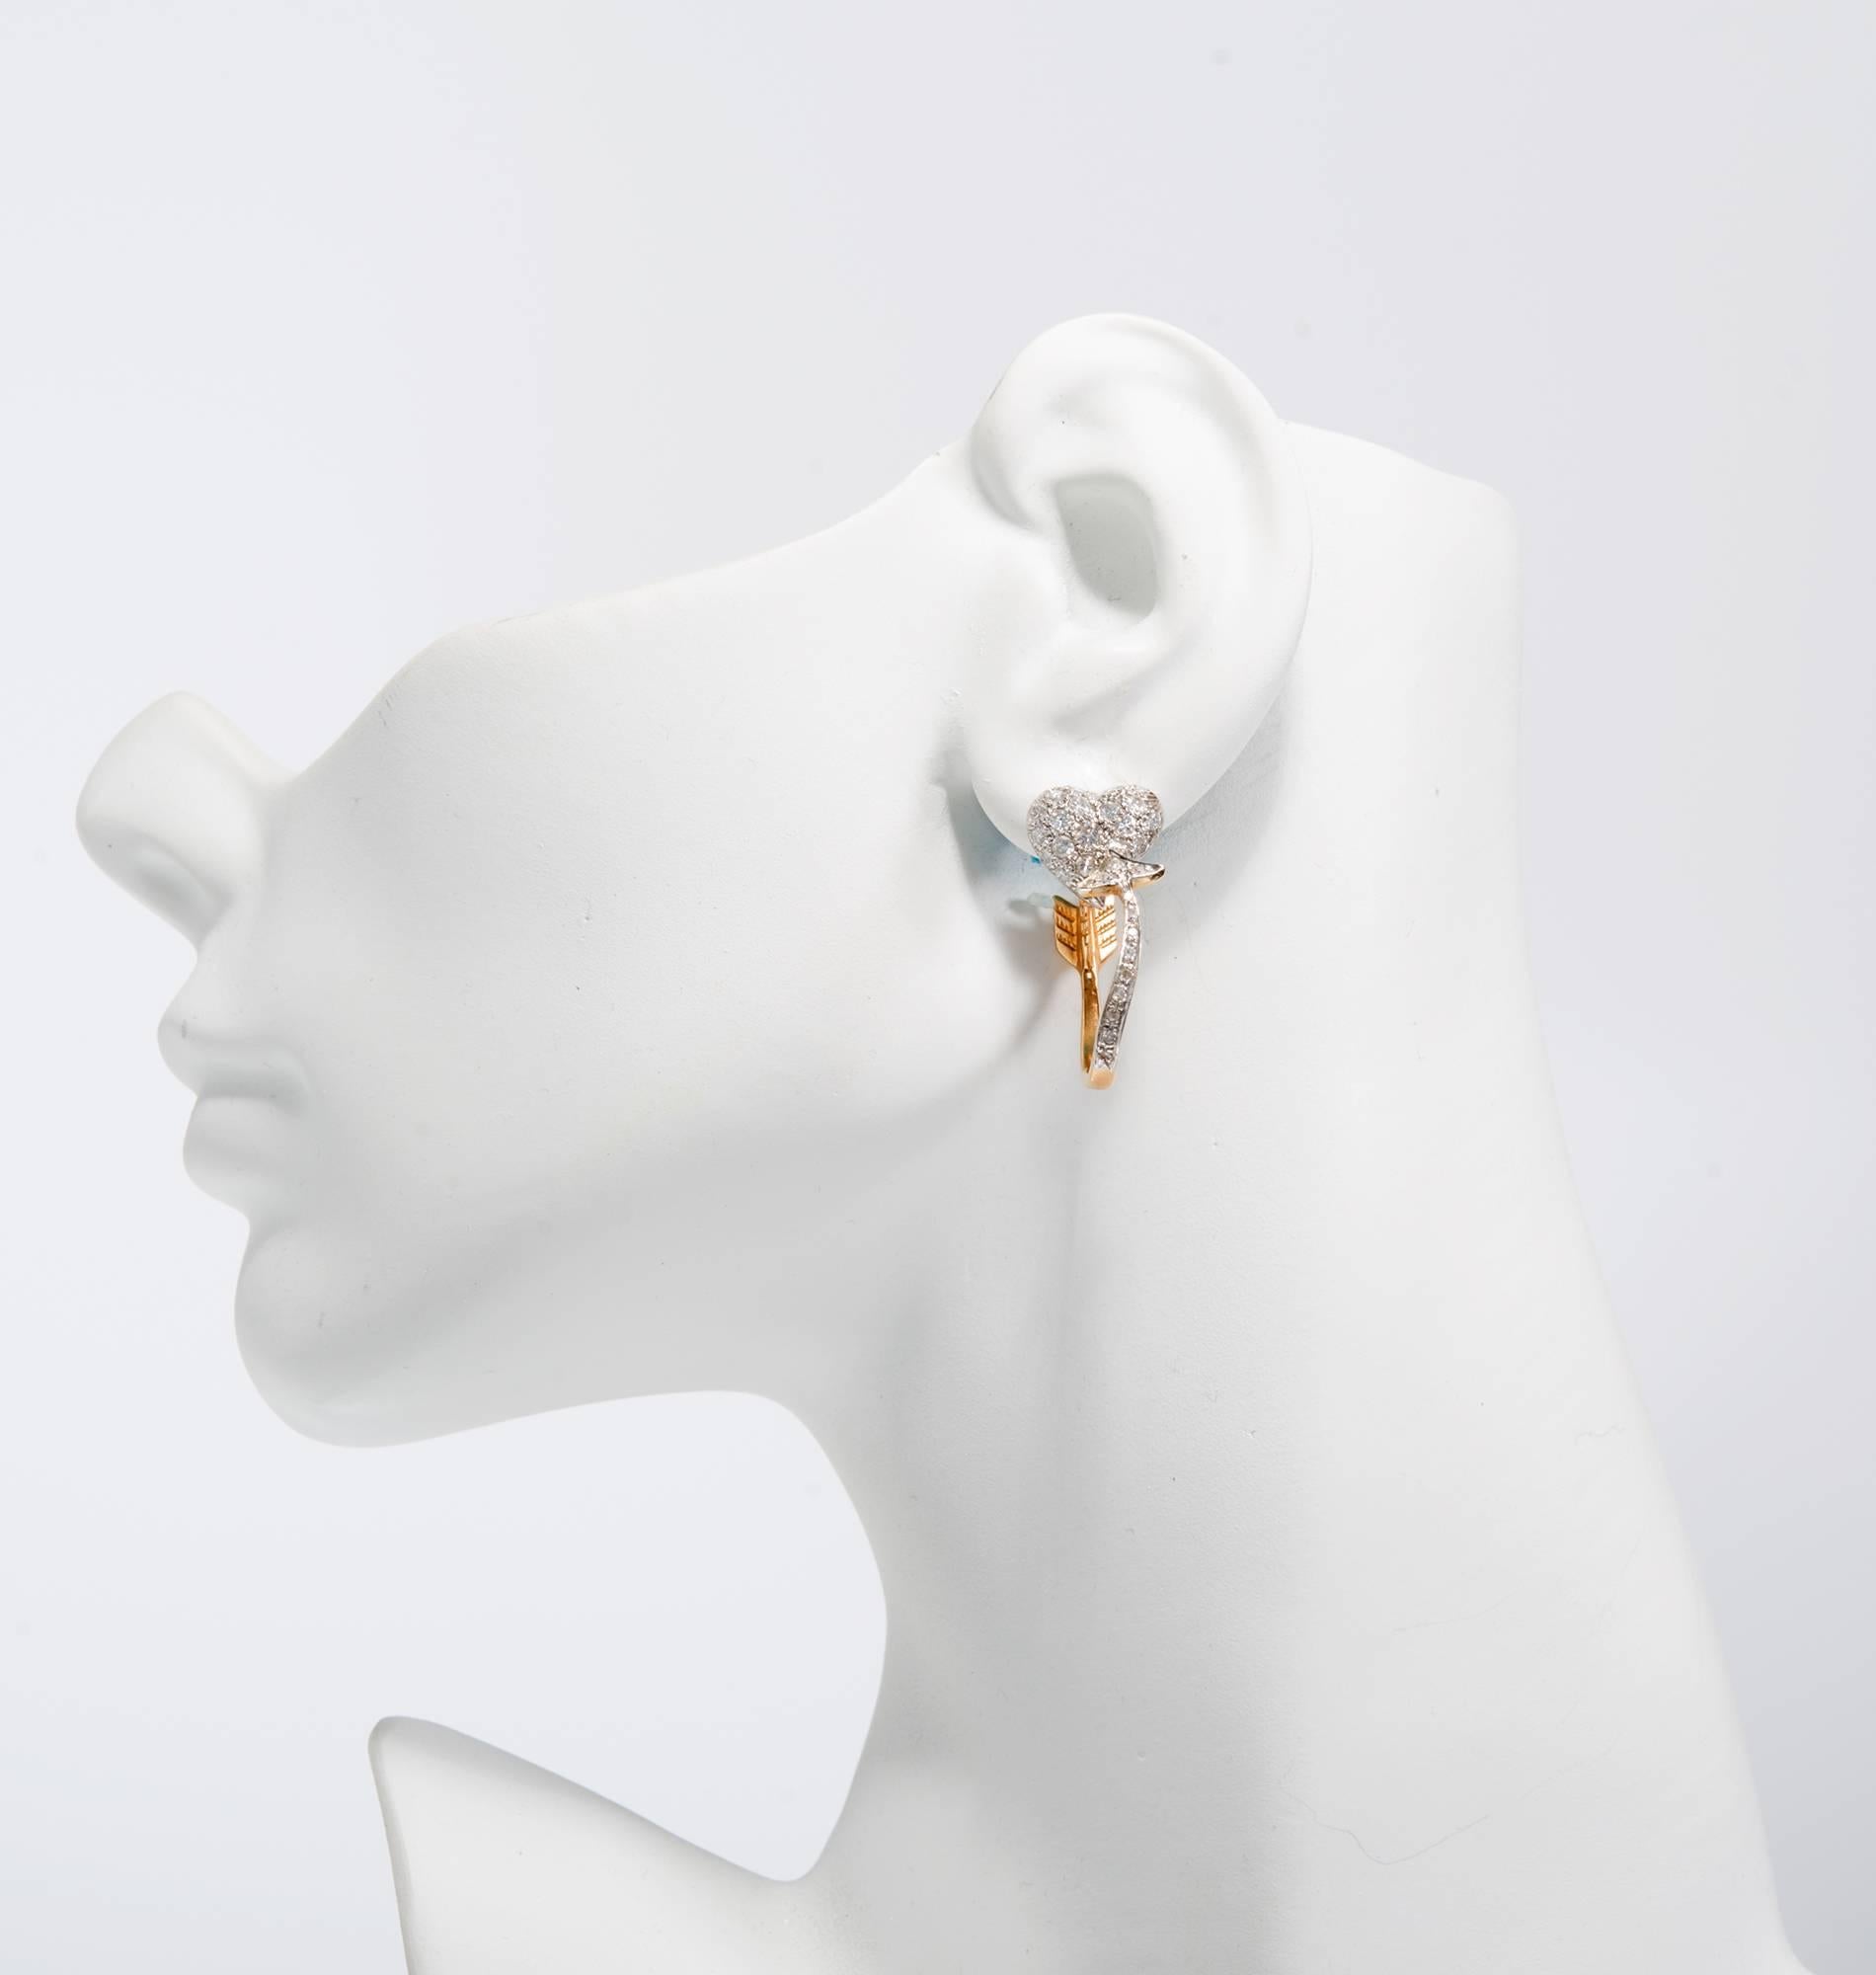 Diamond heart with a yellow gold curved arrow hoop earrings set in 14k white and yellow gold.

90 round diamonds approx. total weight 1.50cts, G, VS-SI1
14k White Gold and yellow gold. 
Stamped: 14k
9.5 grams
Hearts: ½ inch across
Top of heart to